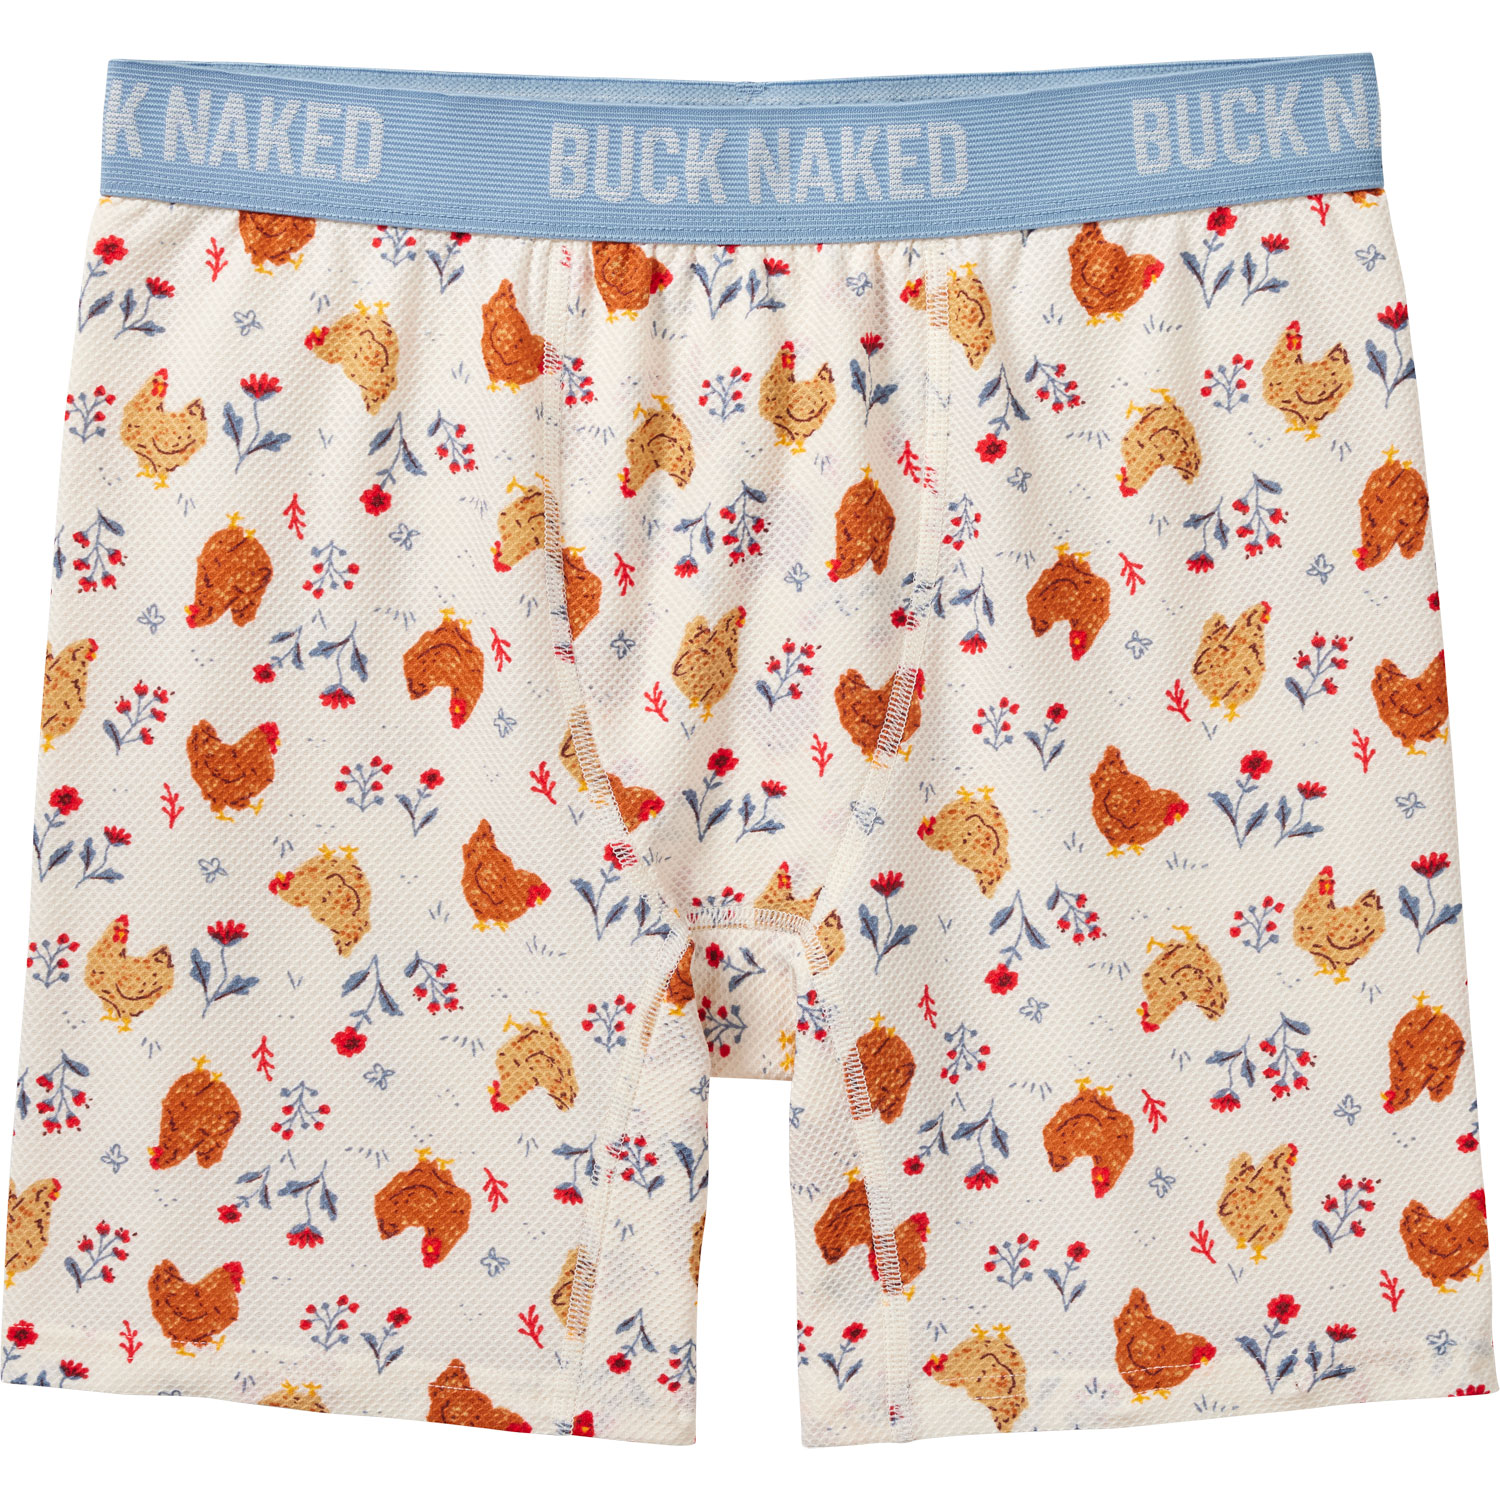 Duluth Trading Co. on X: This is just one example of the kind of  enthusiasm you see for Buck Naked – it's underwear worth oversharing. If  you haven't tried them, this is